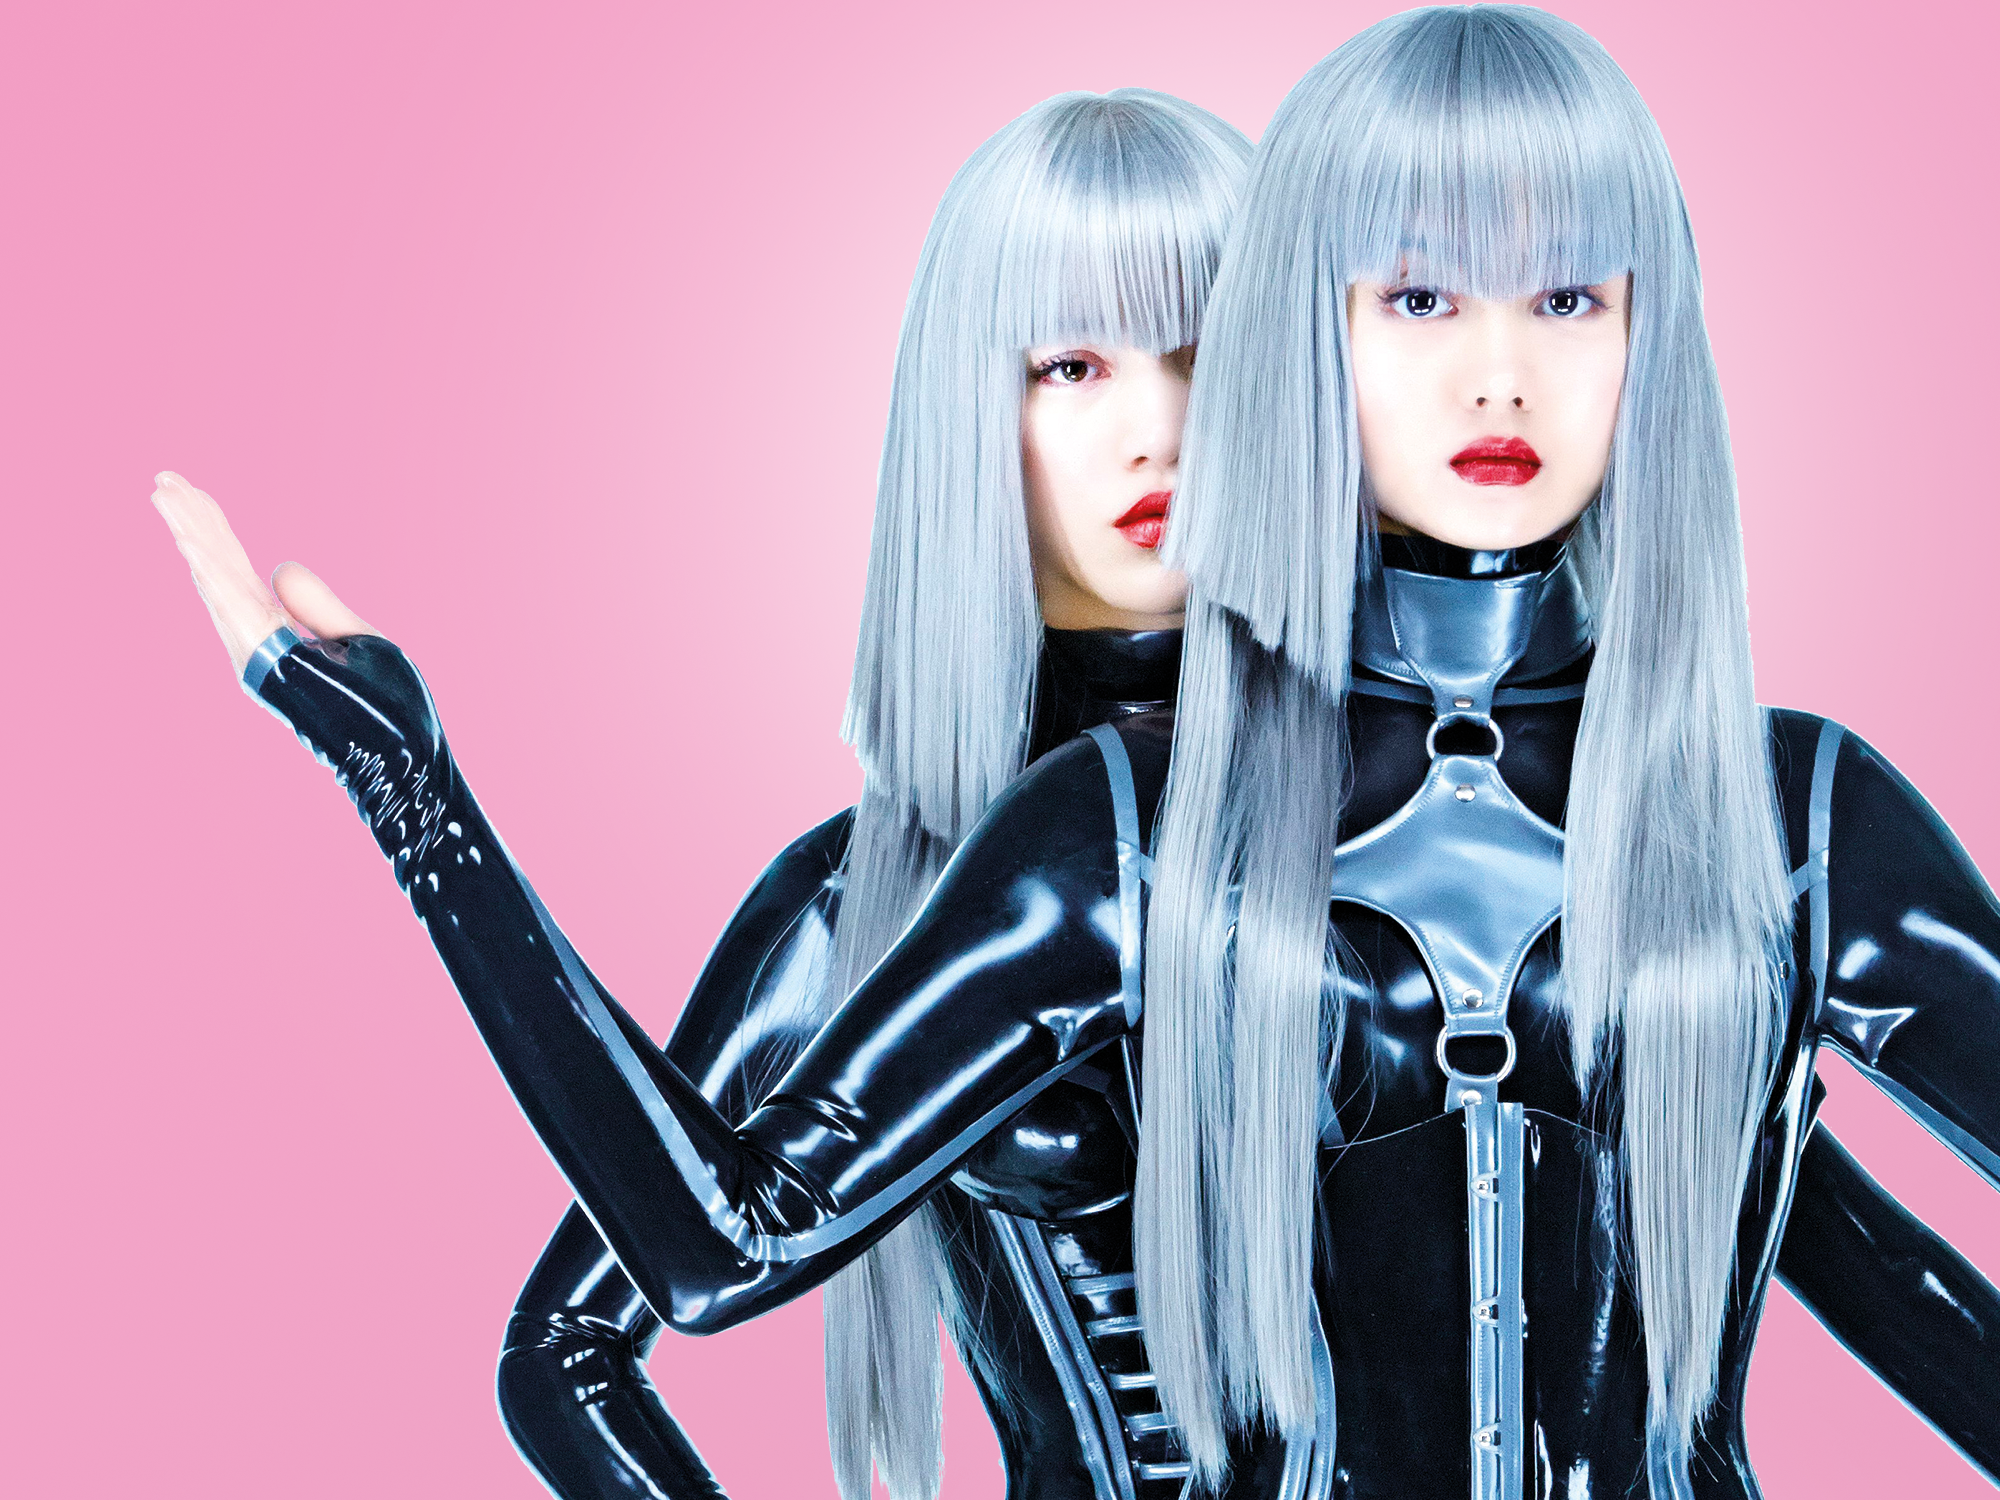 FEMM, J-Pop’s Hit Mannequin Duo: “There are so many situations where women need to be strong”